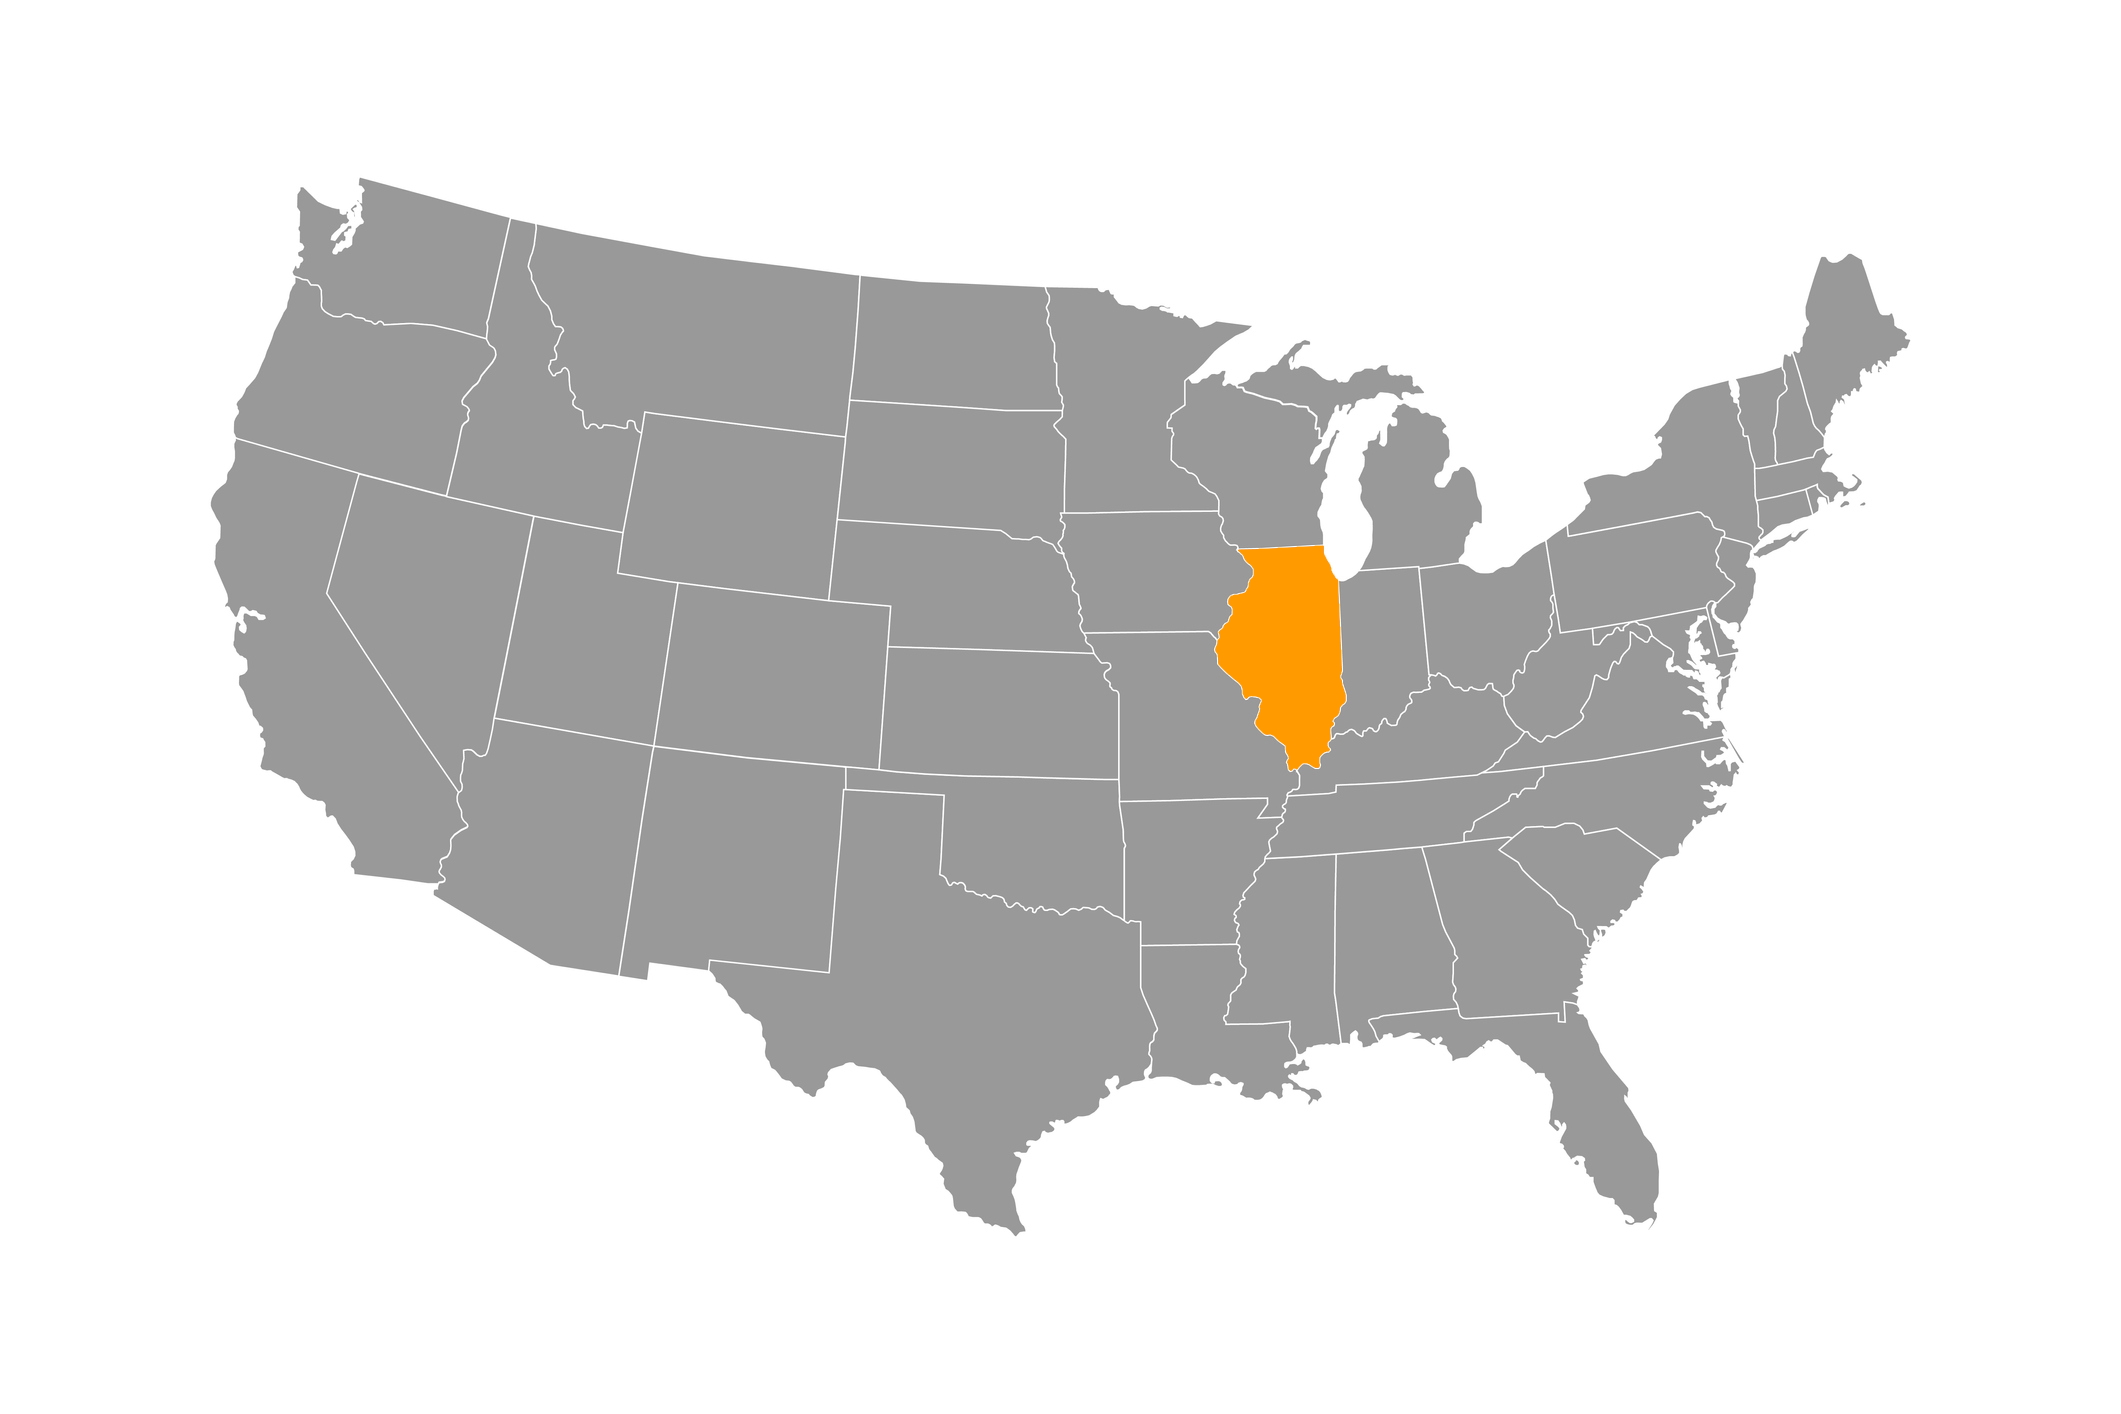 A map of the United States with Illinois highlighted in orange